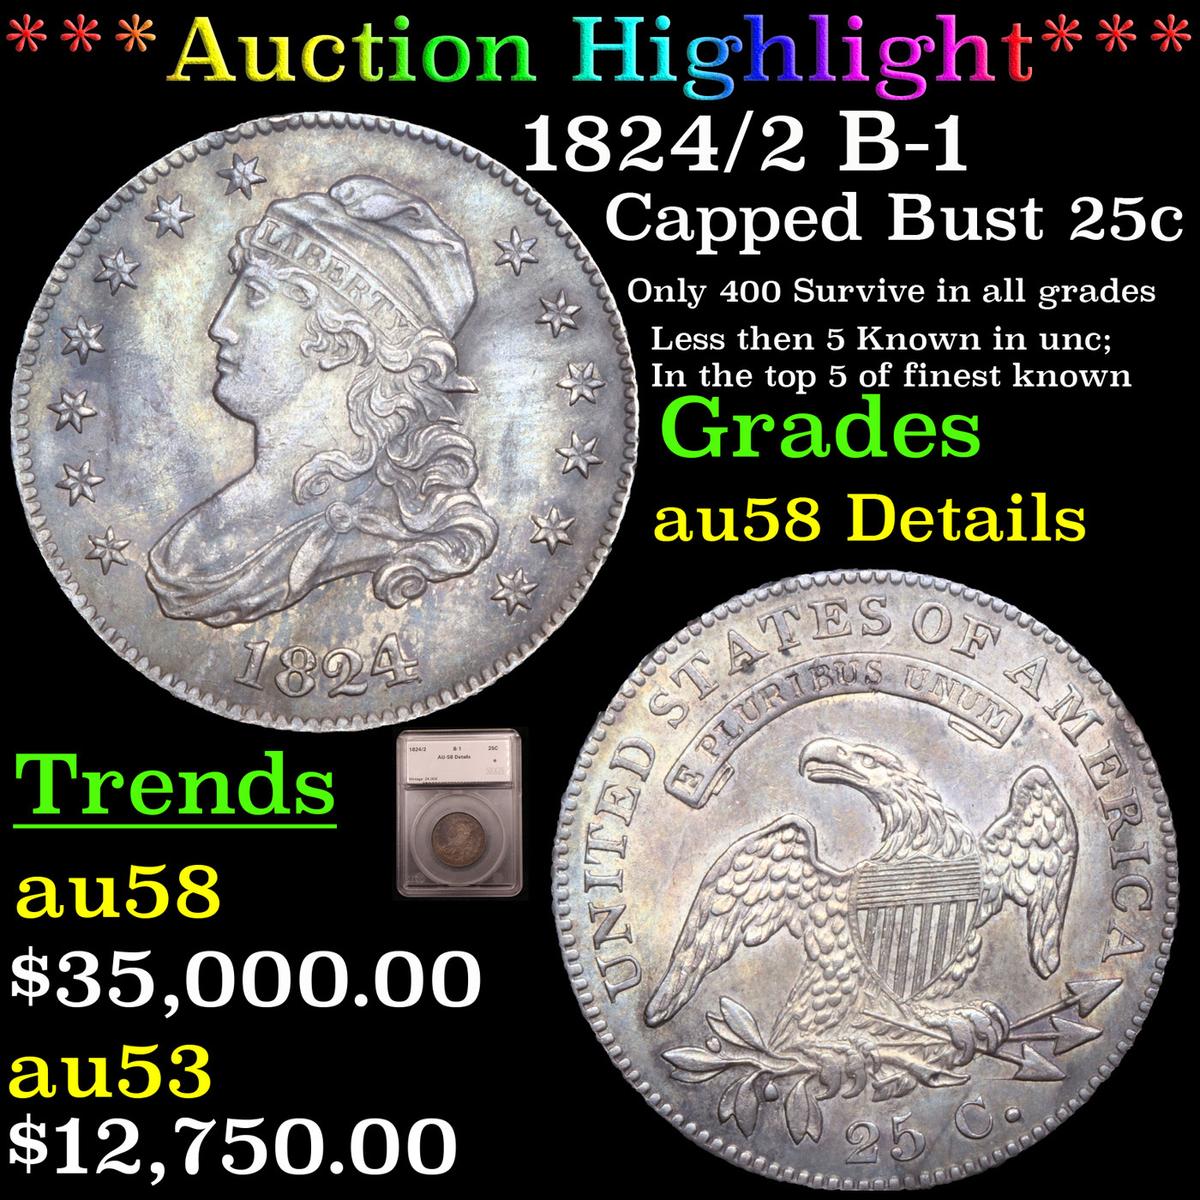 ***Auction Highlight*** 1824/2 B-1 Capped Bust Quarter 25c Graded au58 Details By SEGS (fc)